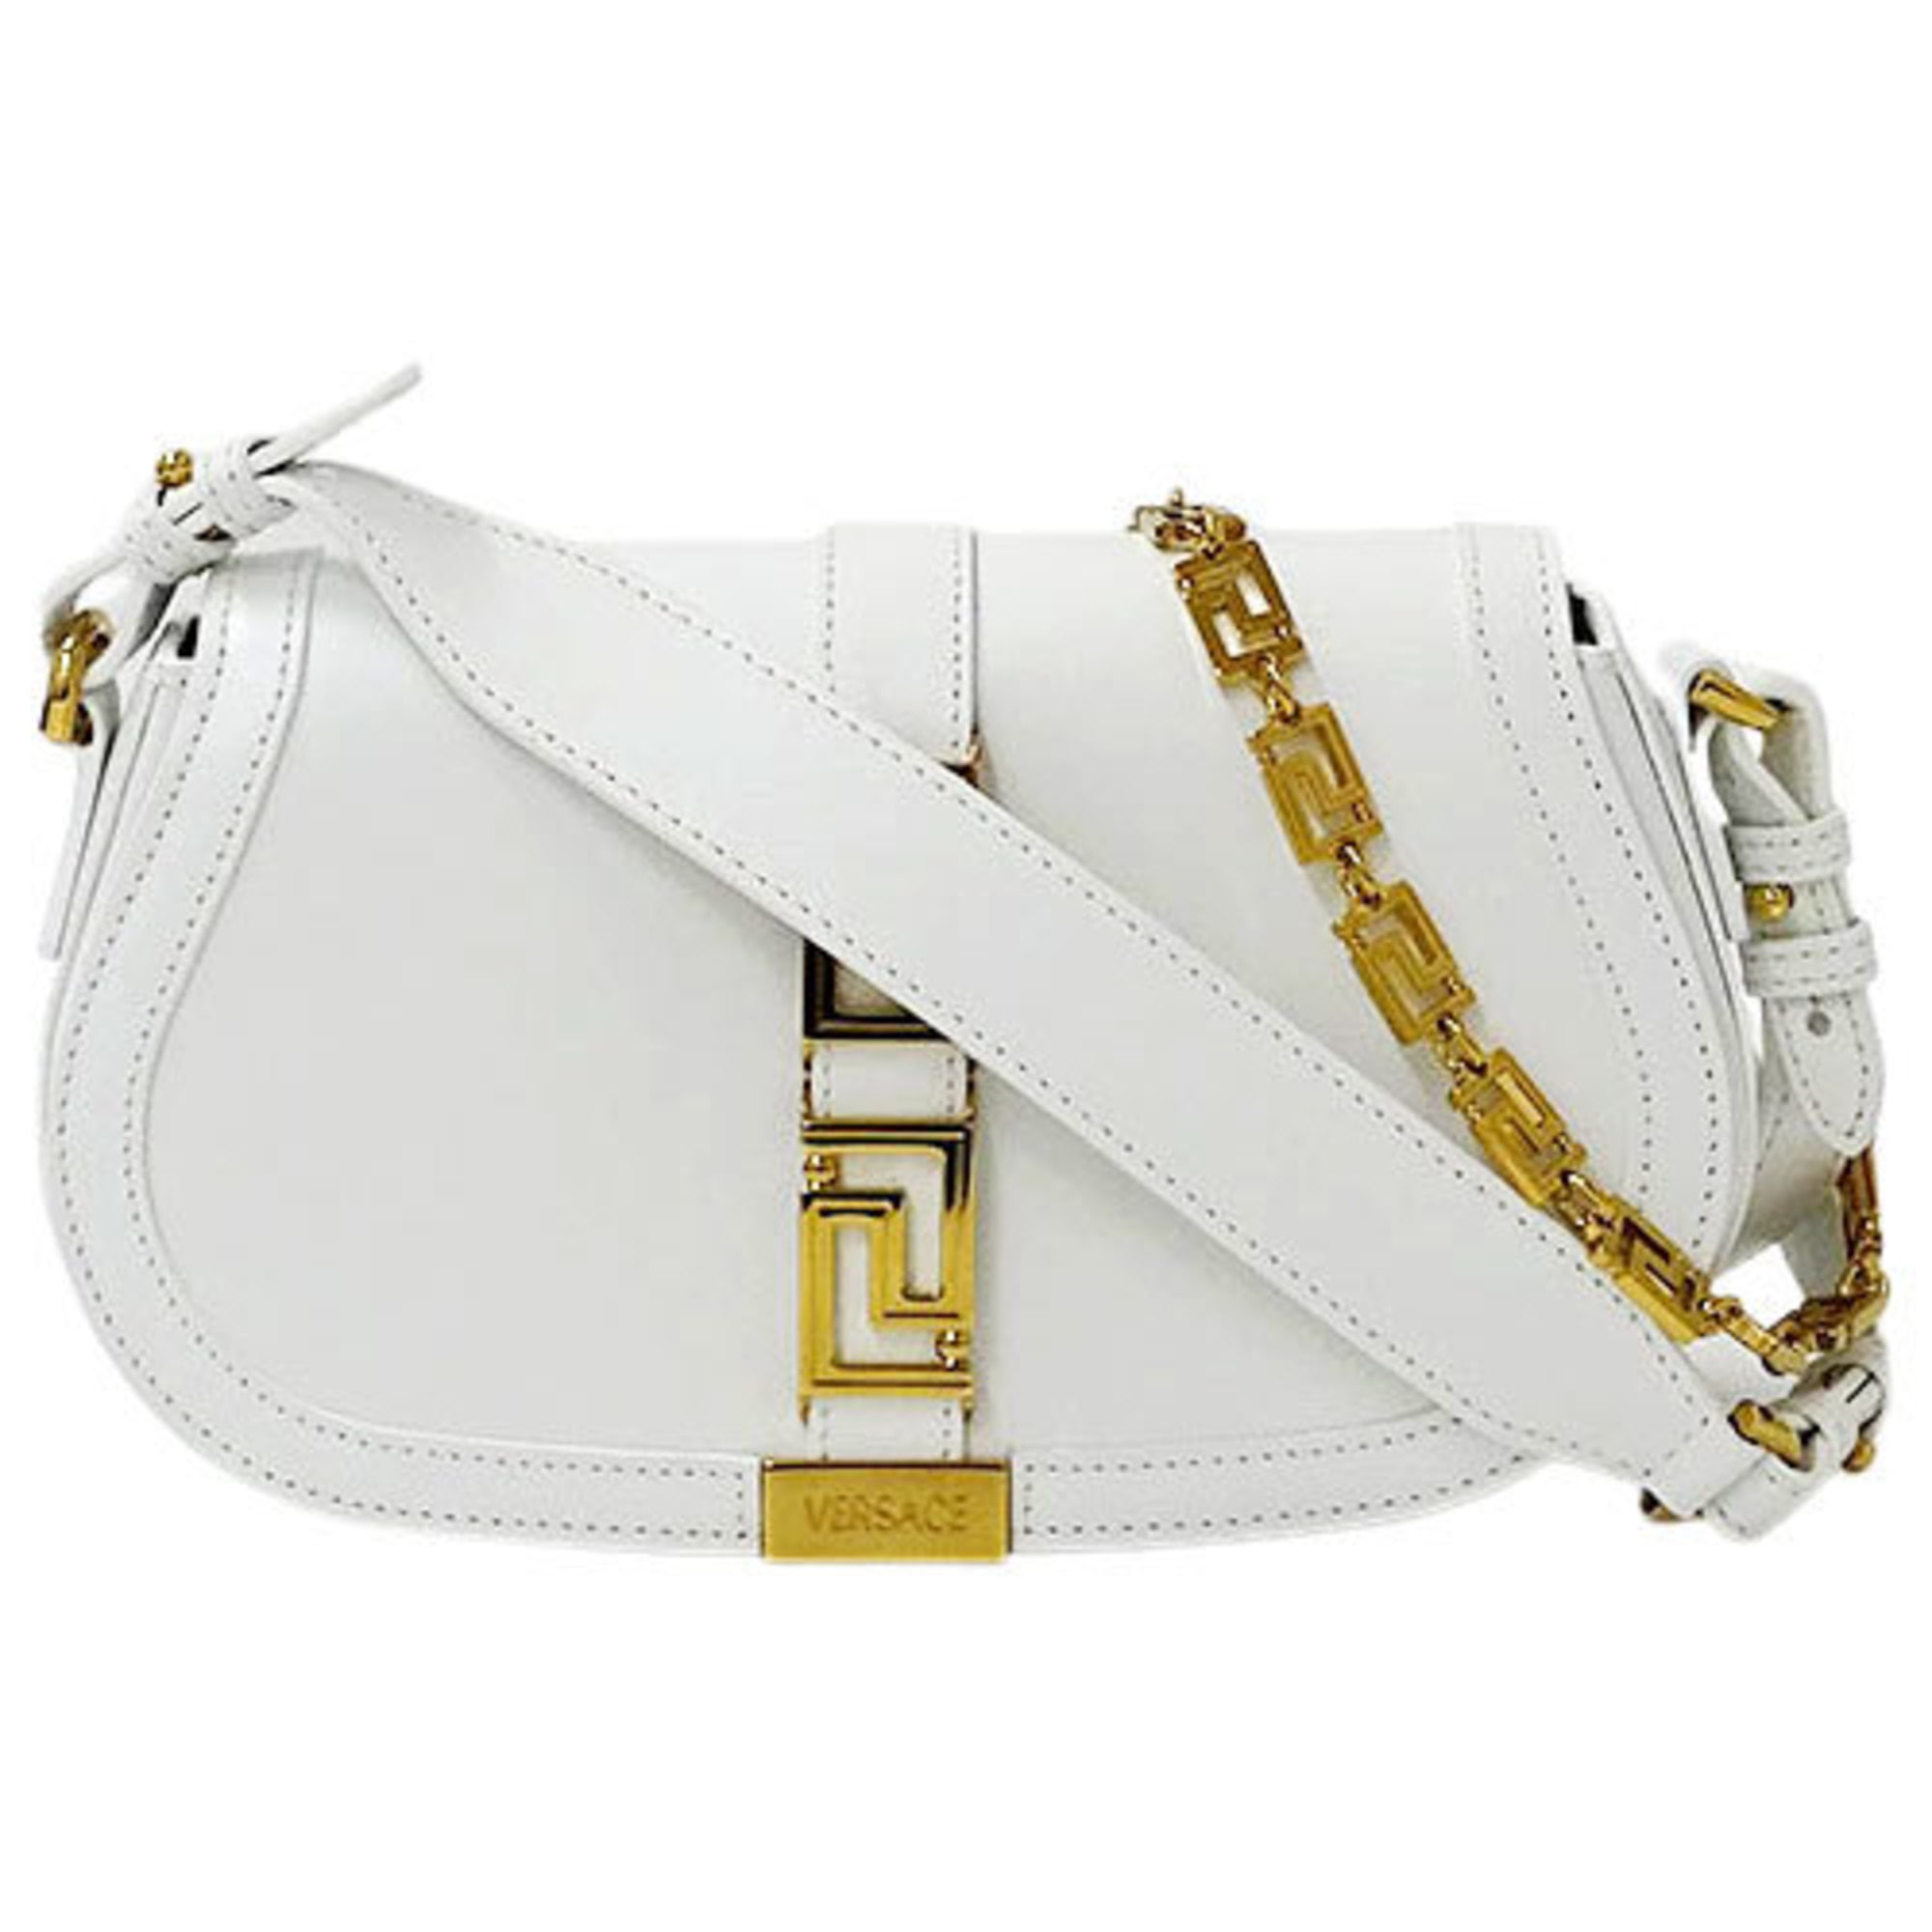 Host of Through Survive Authenticated Used Versace VERSACE Bag Women's Shoulder Chain 2way Greca  Goddess Leather White 1107128 - Walmart.com